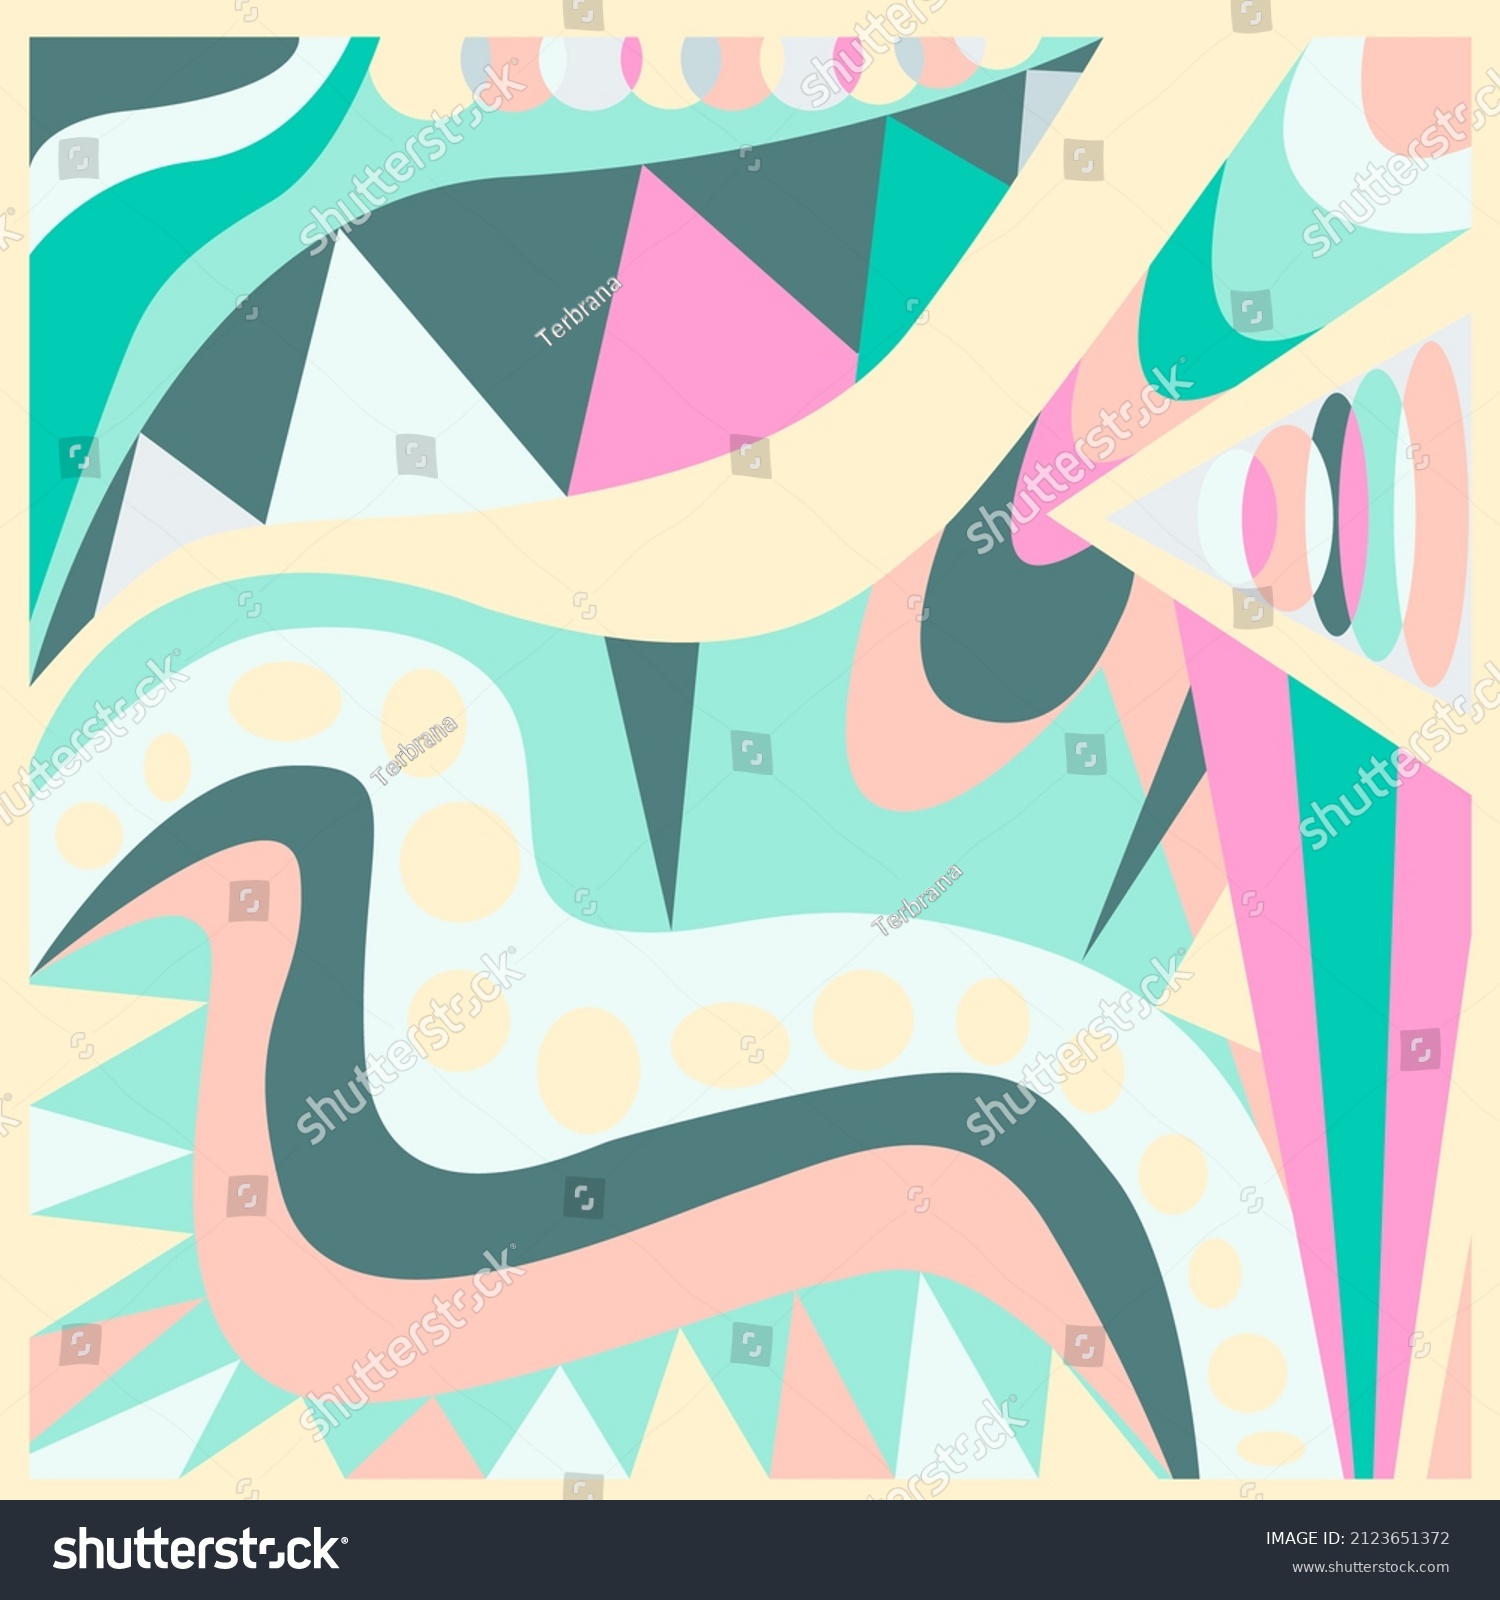 3,050 Pucci pattern simple Images, Stock Photos & Vectors | Shutterstock